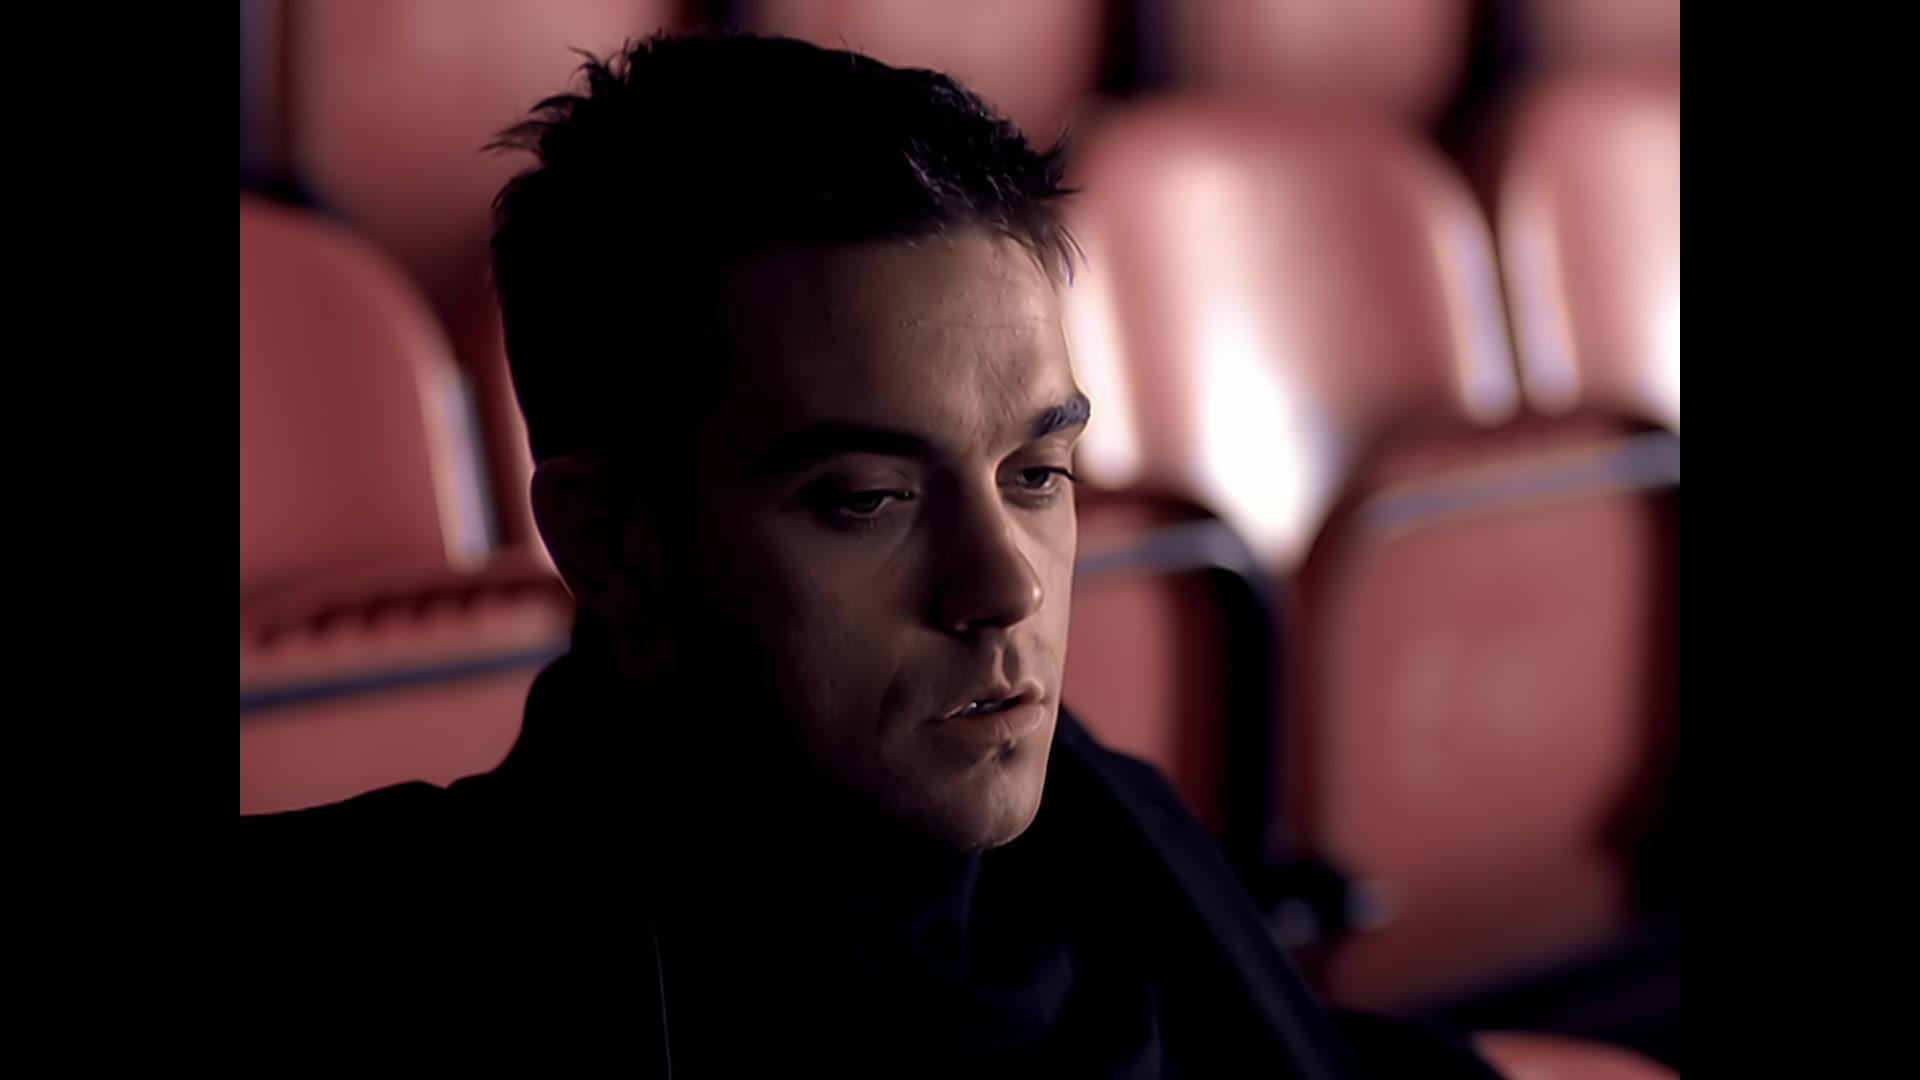 Robbie Williams - She's The One (Slated Version)